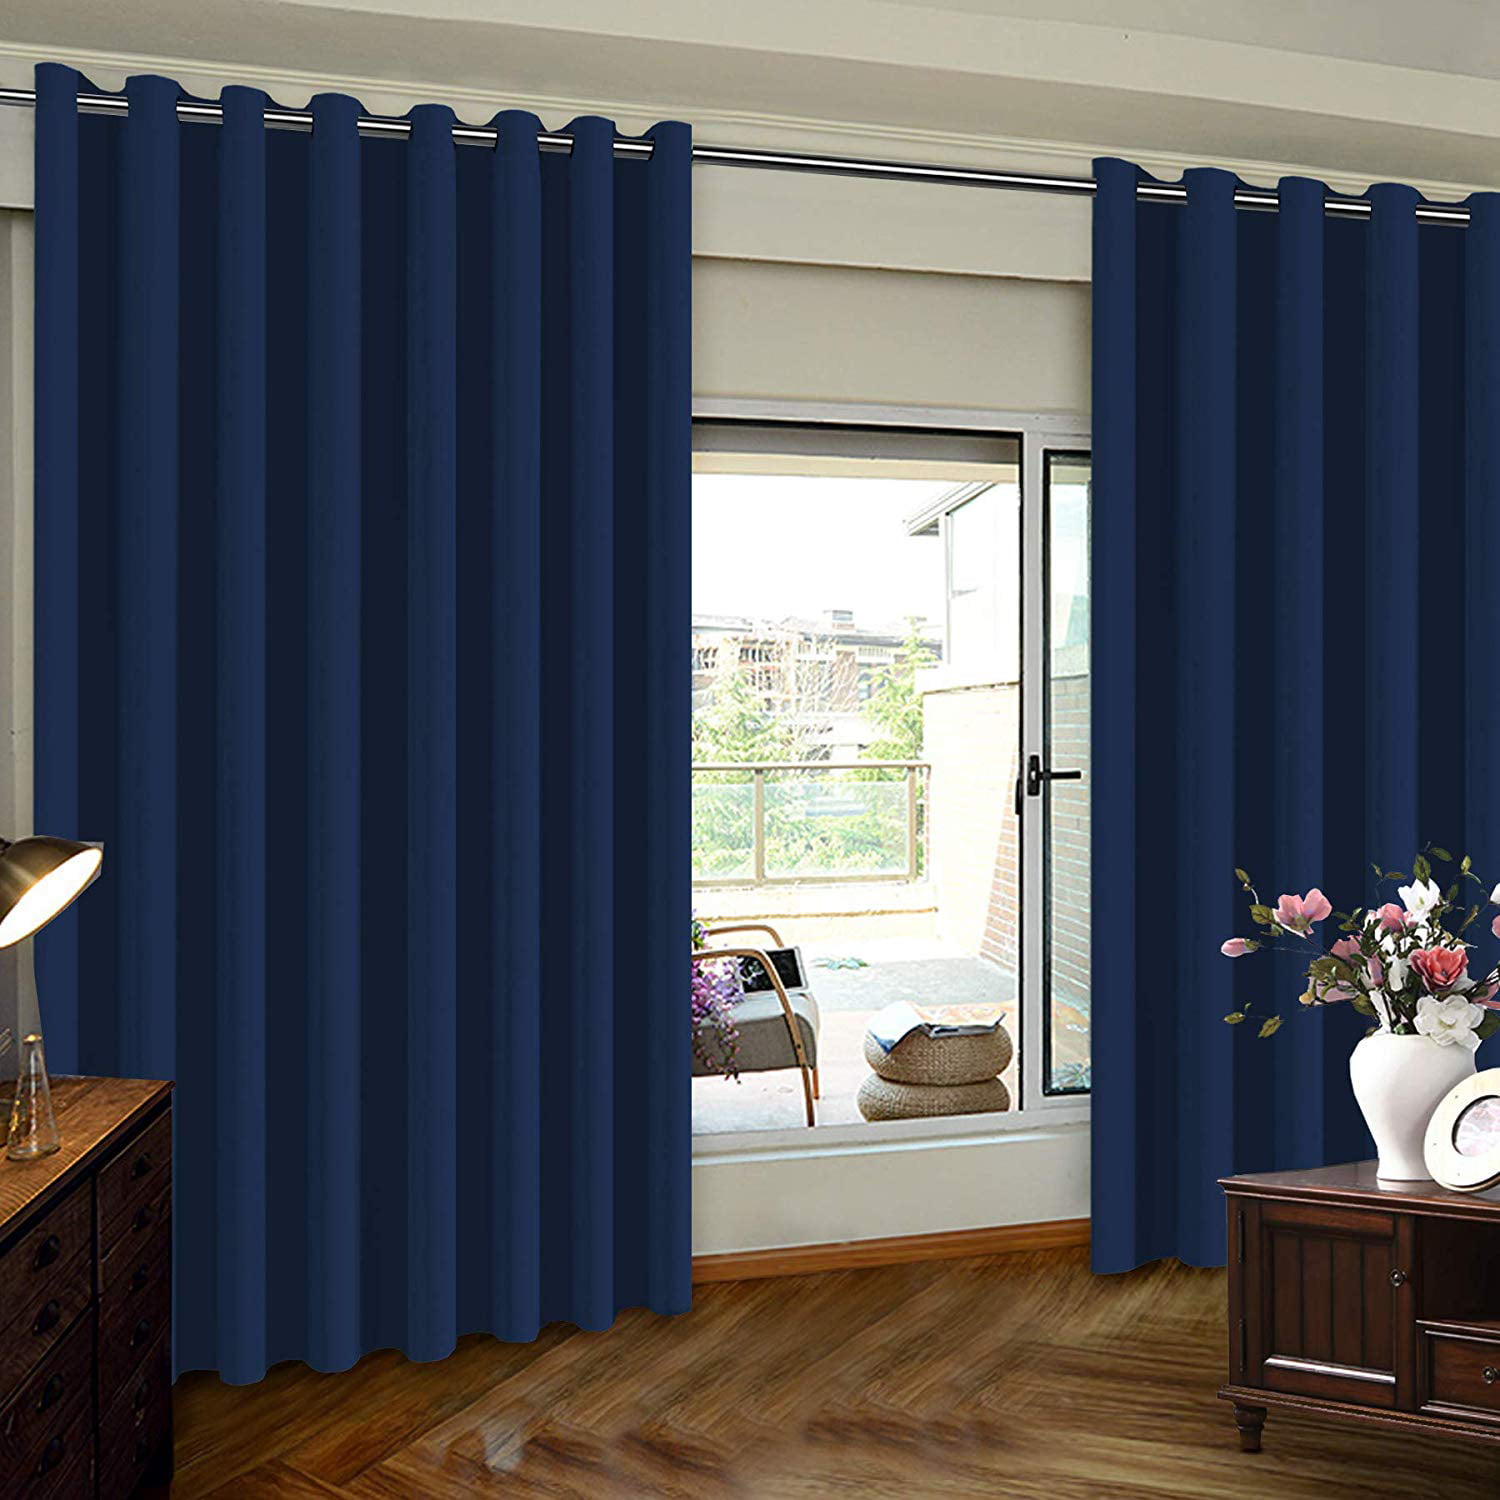 Blackout Curtain for Sliding Door - Patio Door Curtains, Thermal